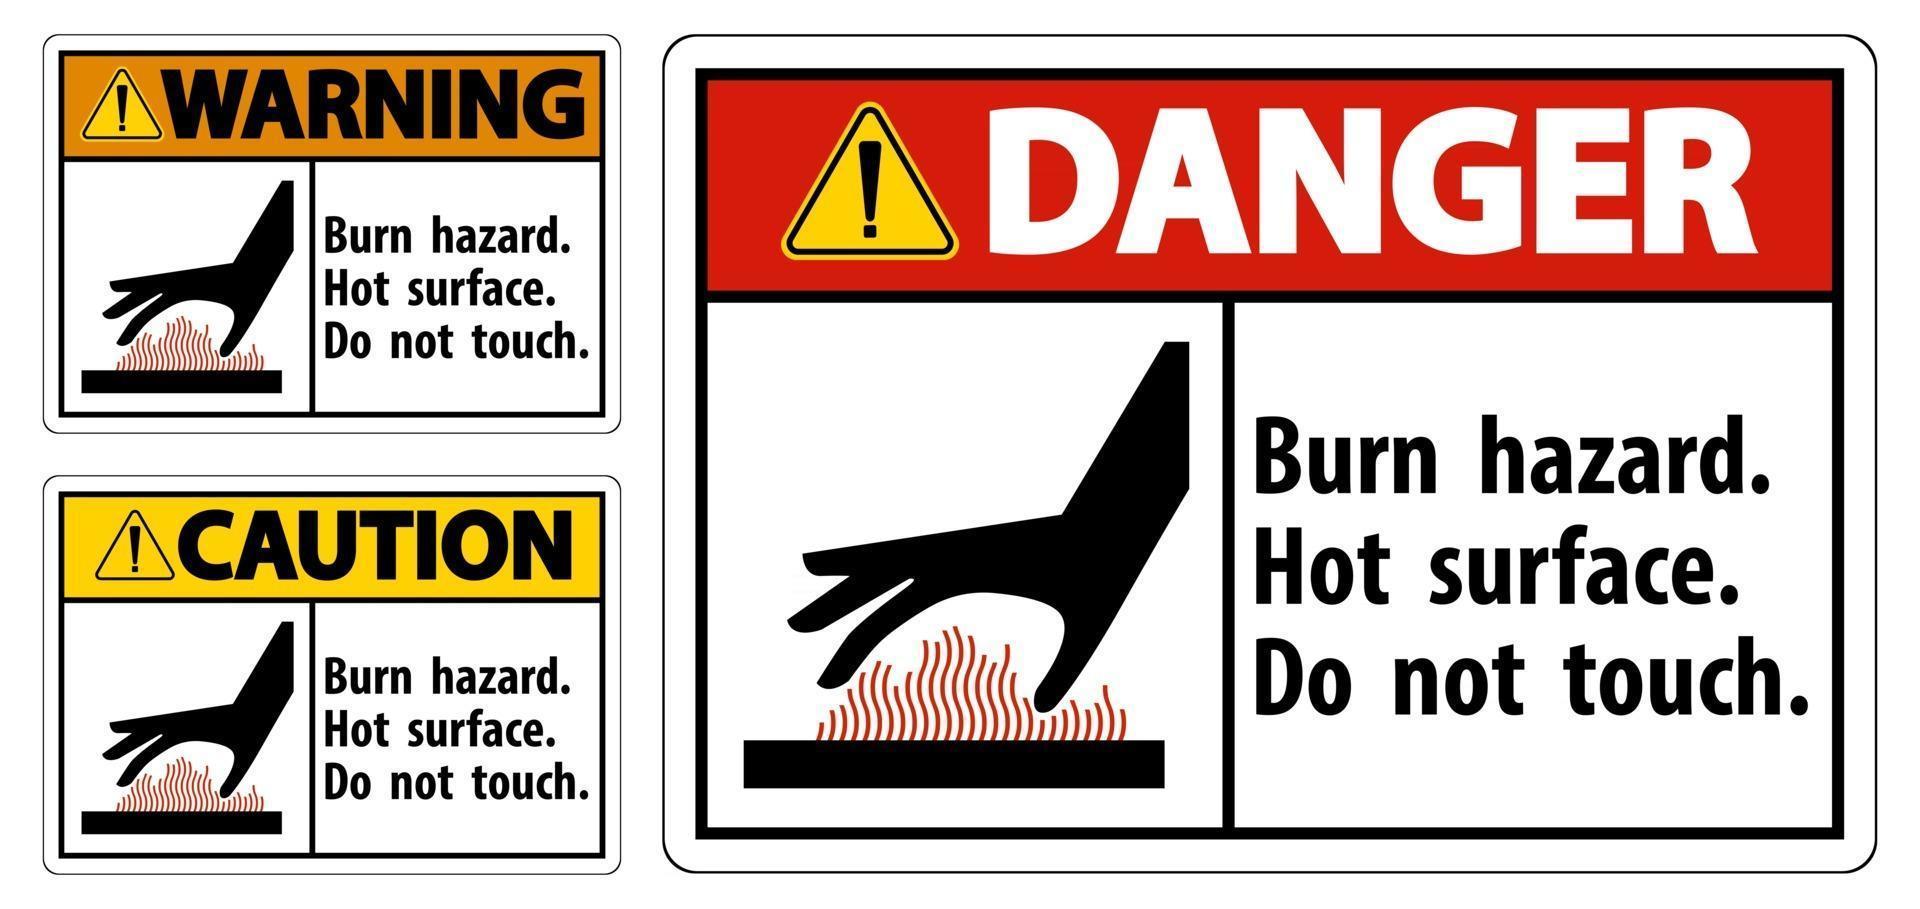 Burn hazard Hot surface Do not touch Symbol Sign Isolate on White Background vector